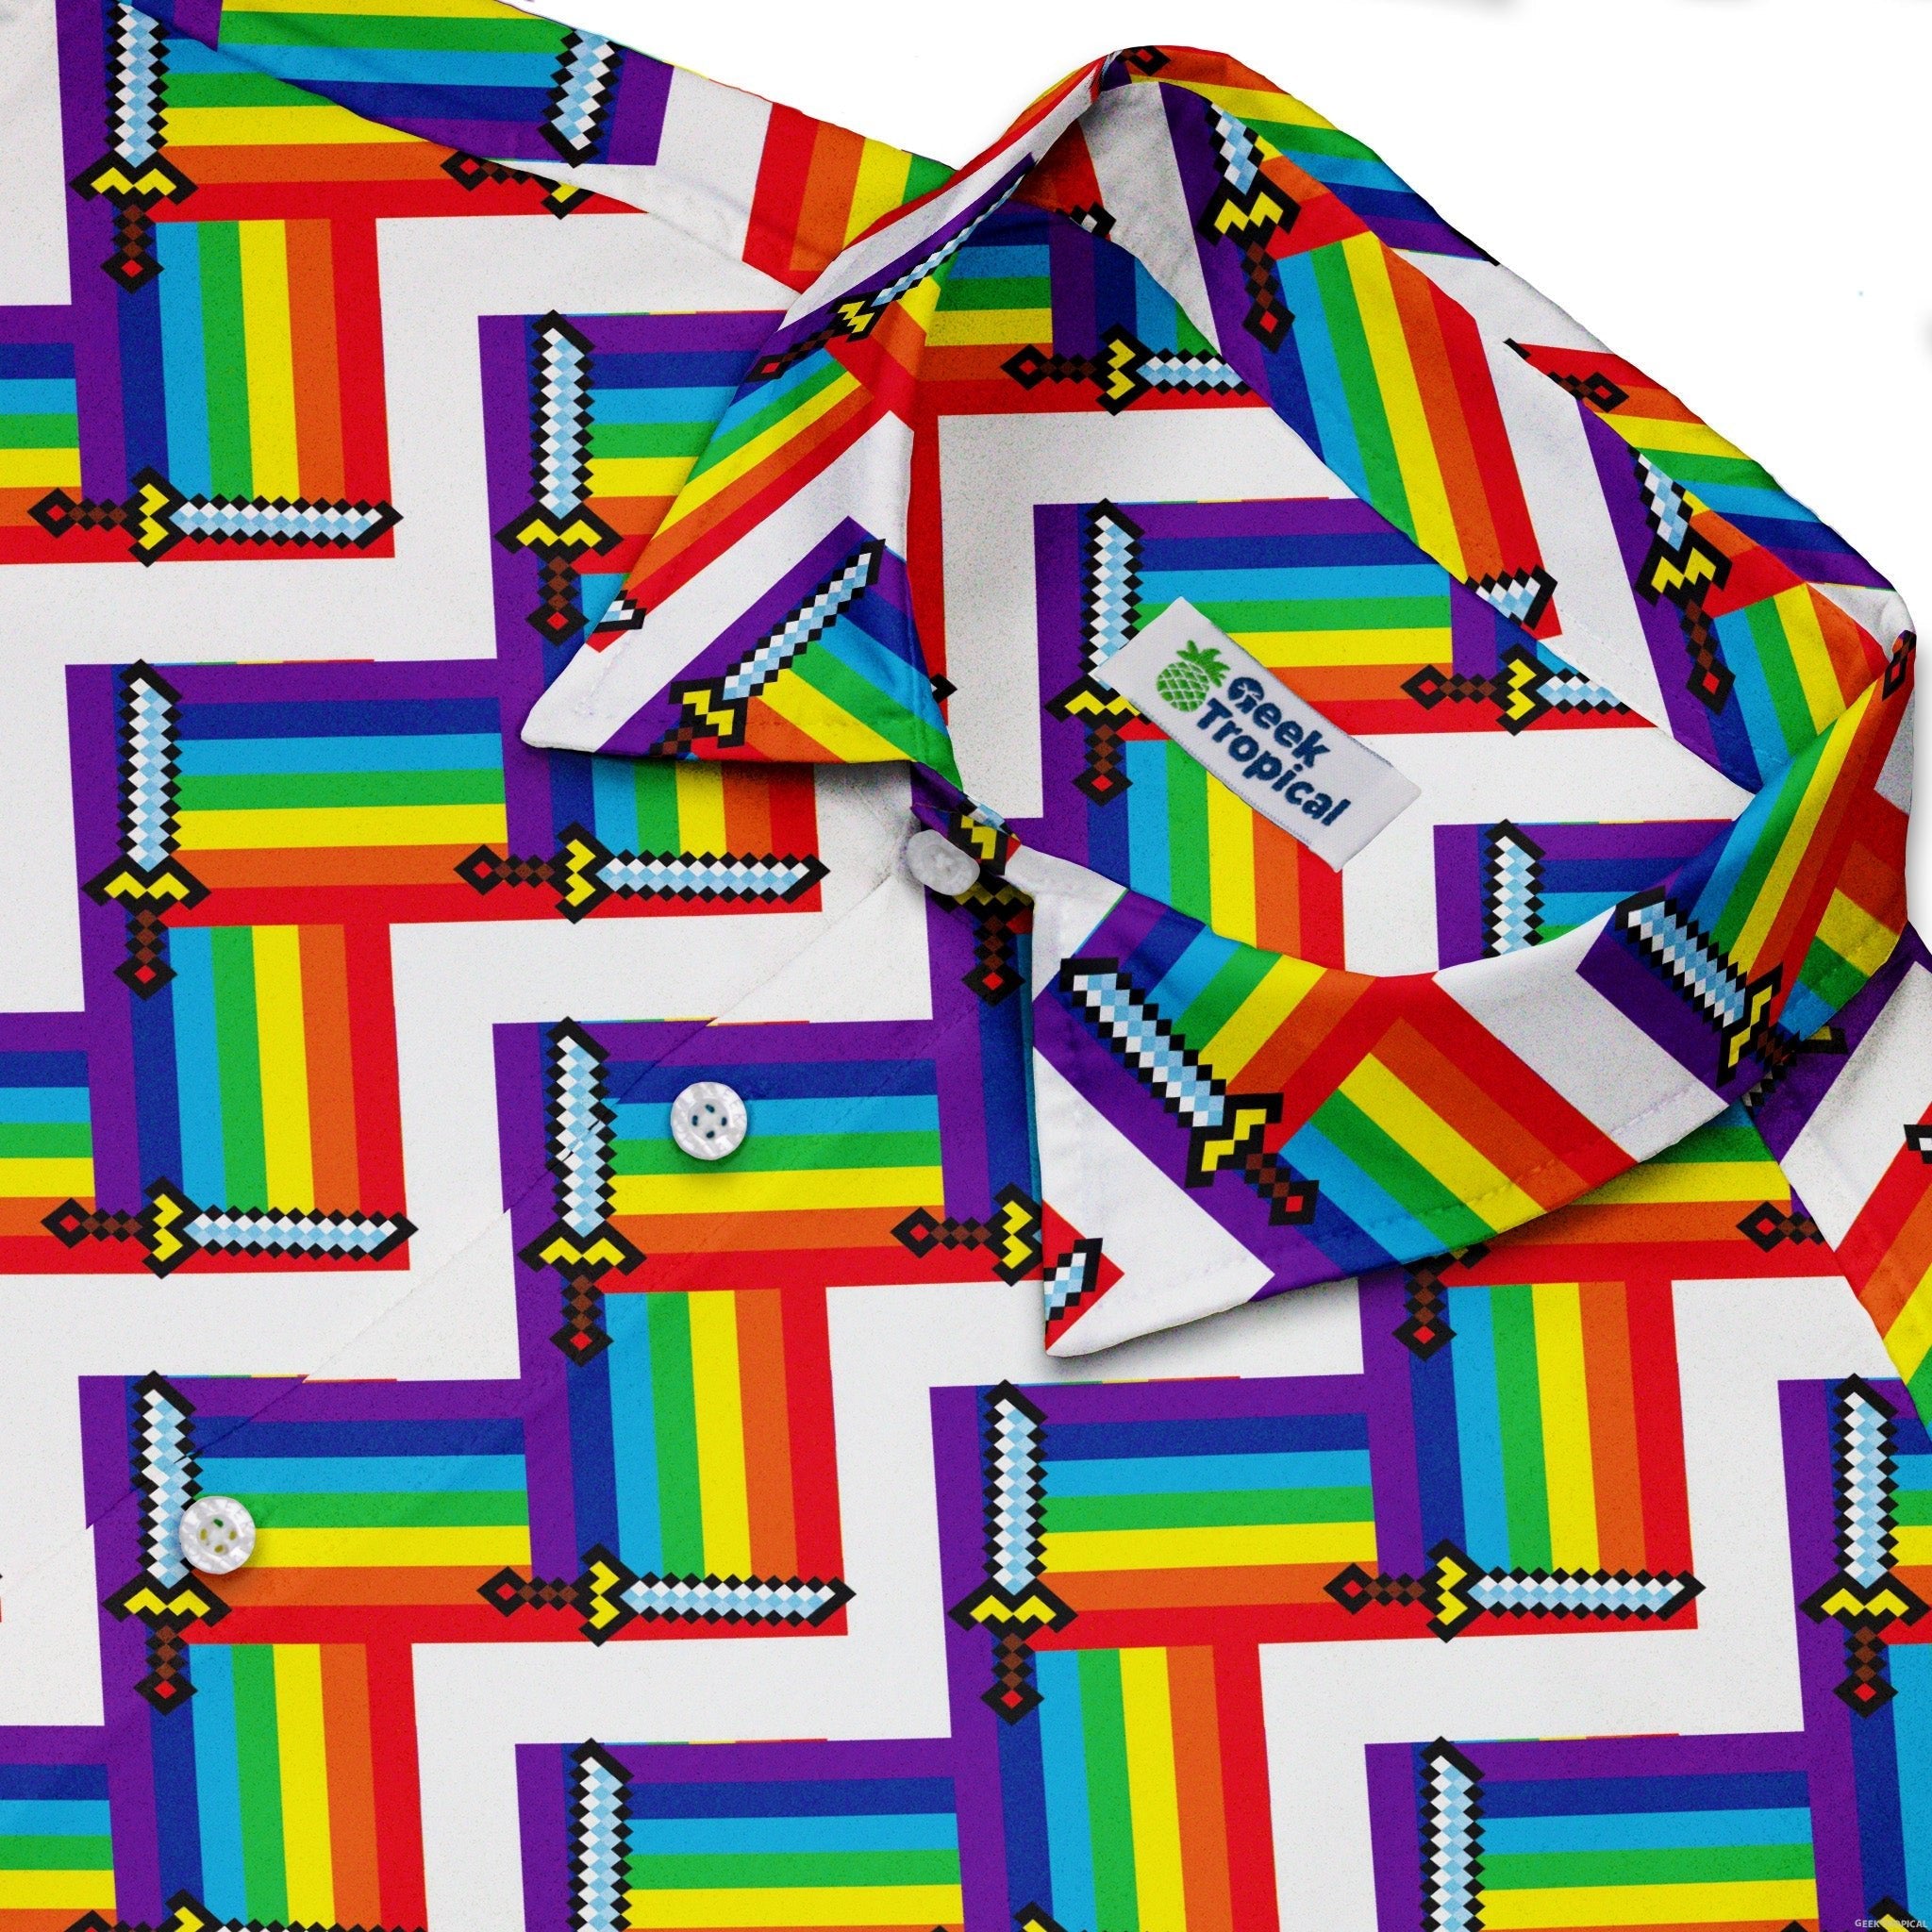 Video Game Swords Rainbow LGBTQ+ Pride Button Up Shirt - adult sizing - Design by Heather Davenport - Pride Patterns